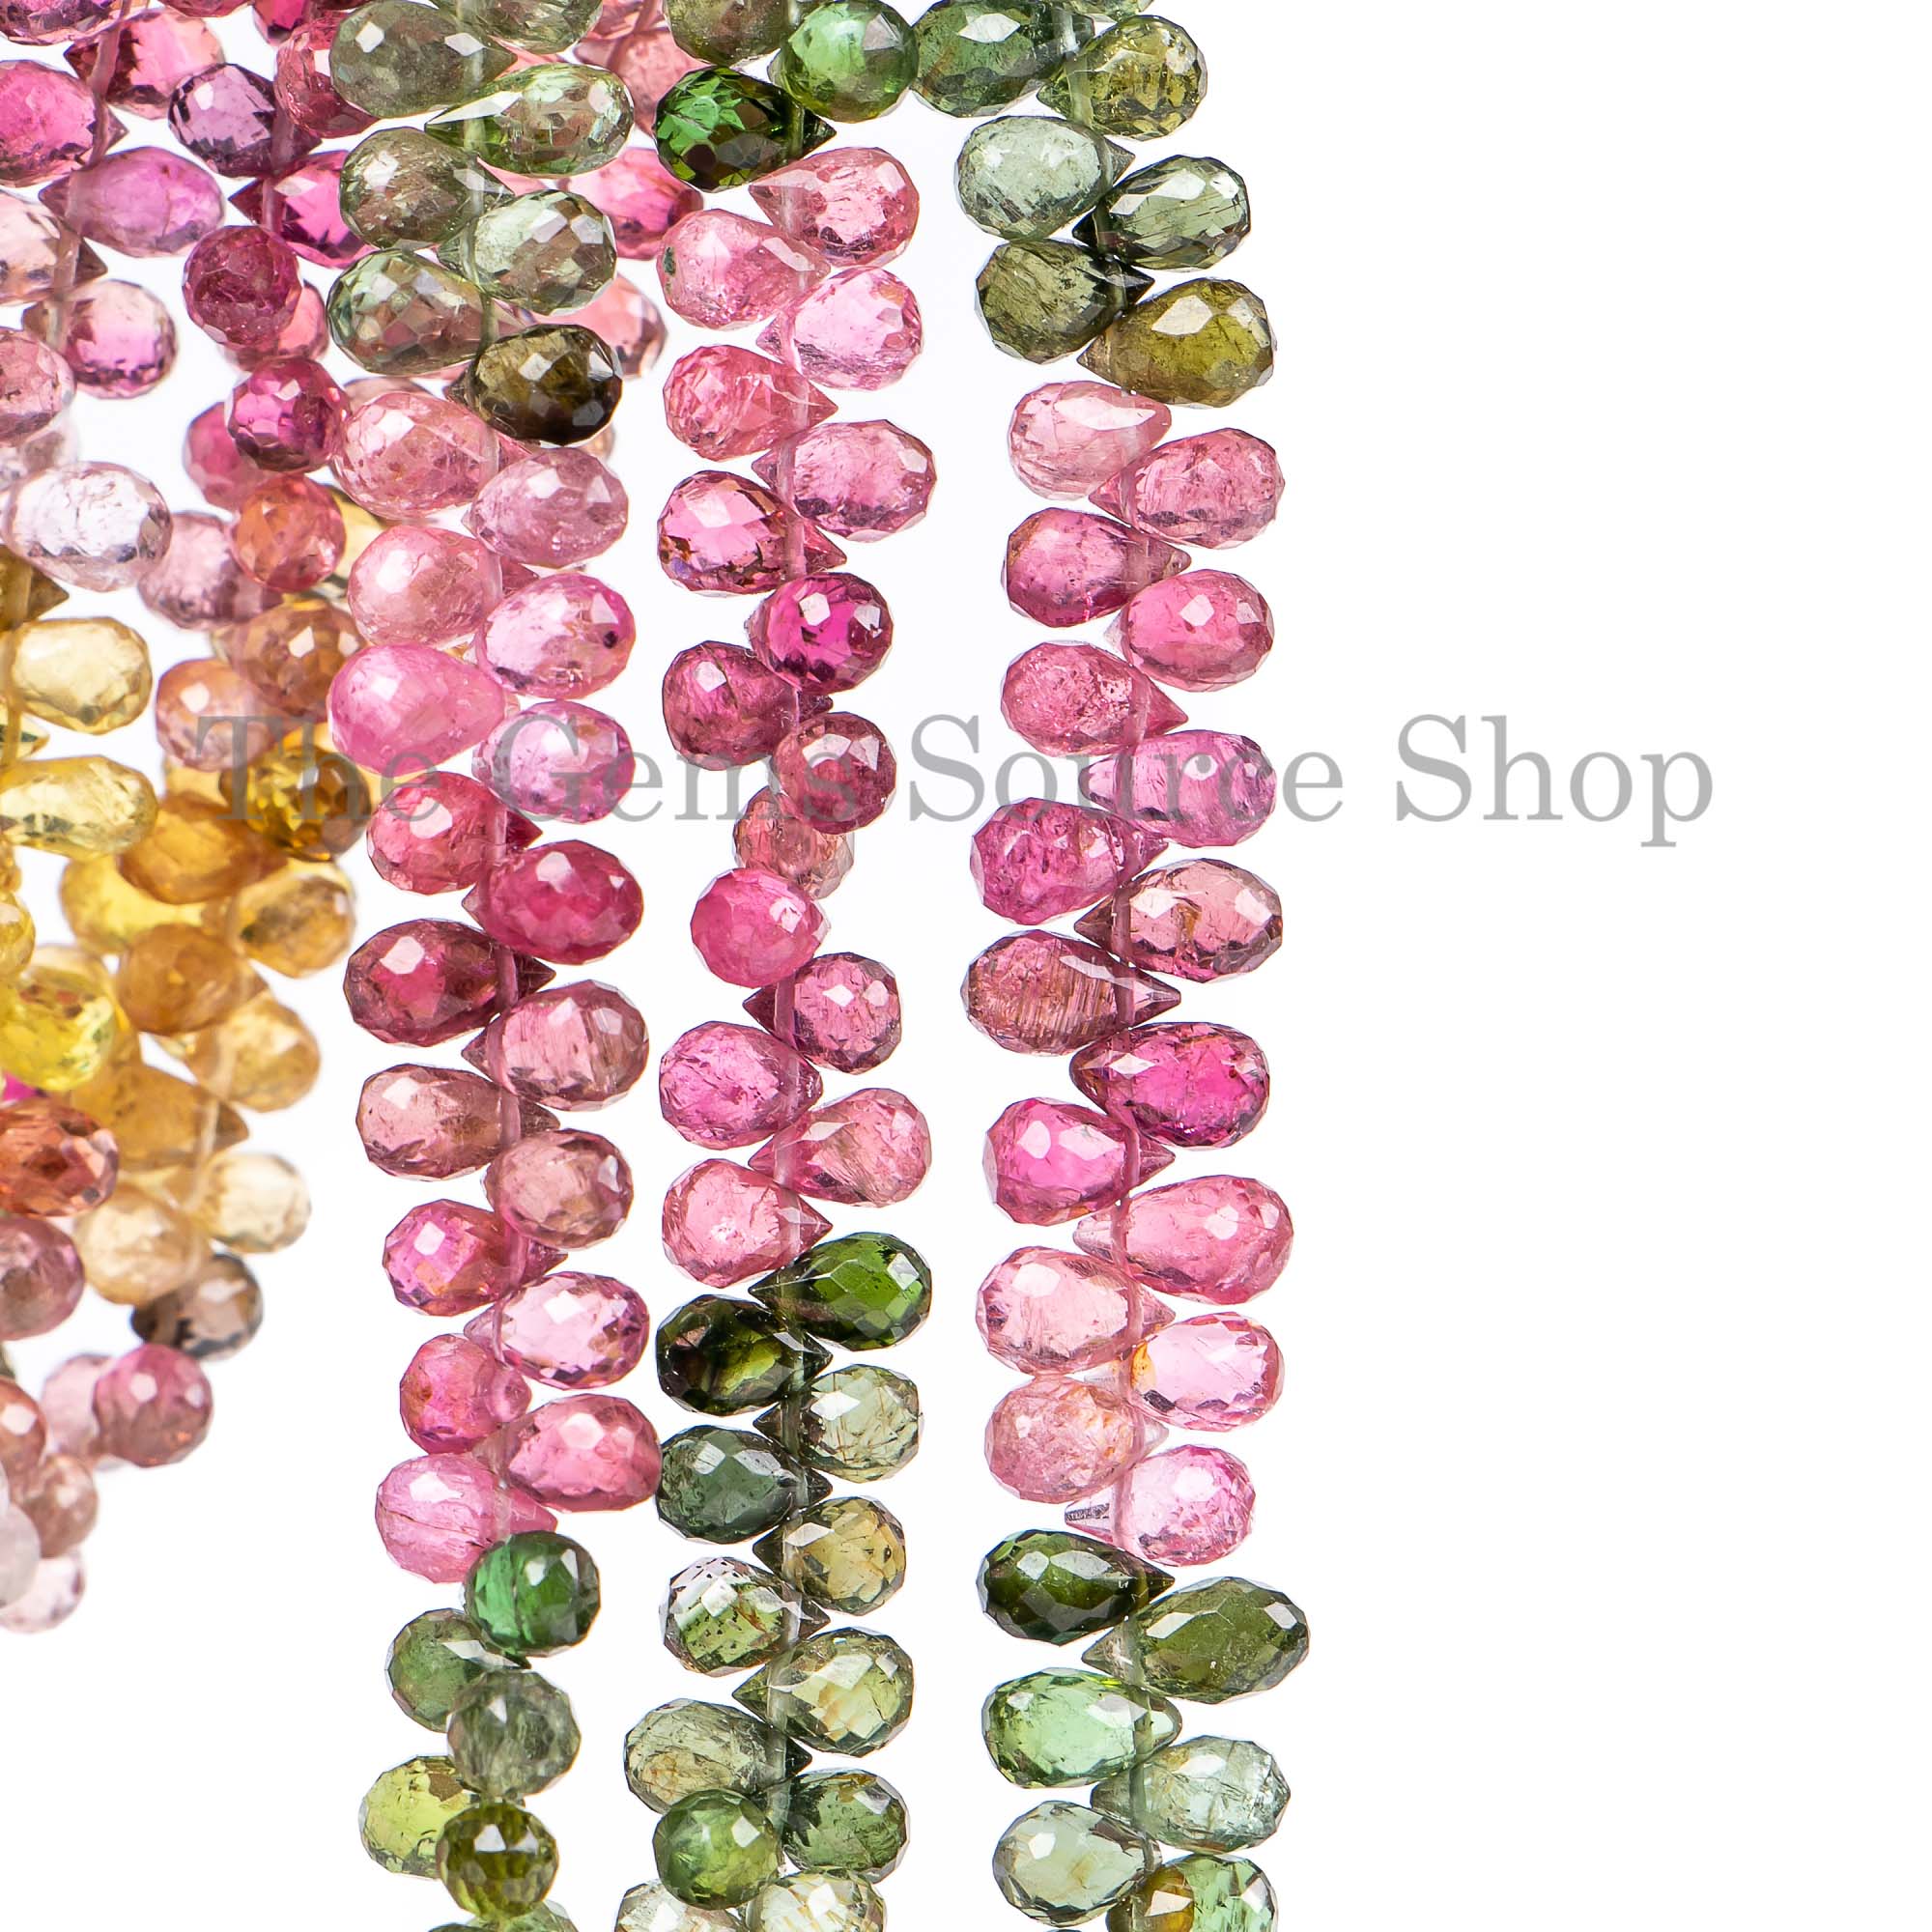 Multi Tourmaline Beads, Tourmaline Faceted Beads, Faceted Drop Beads, Wholesale Beads